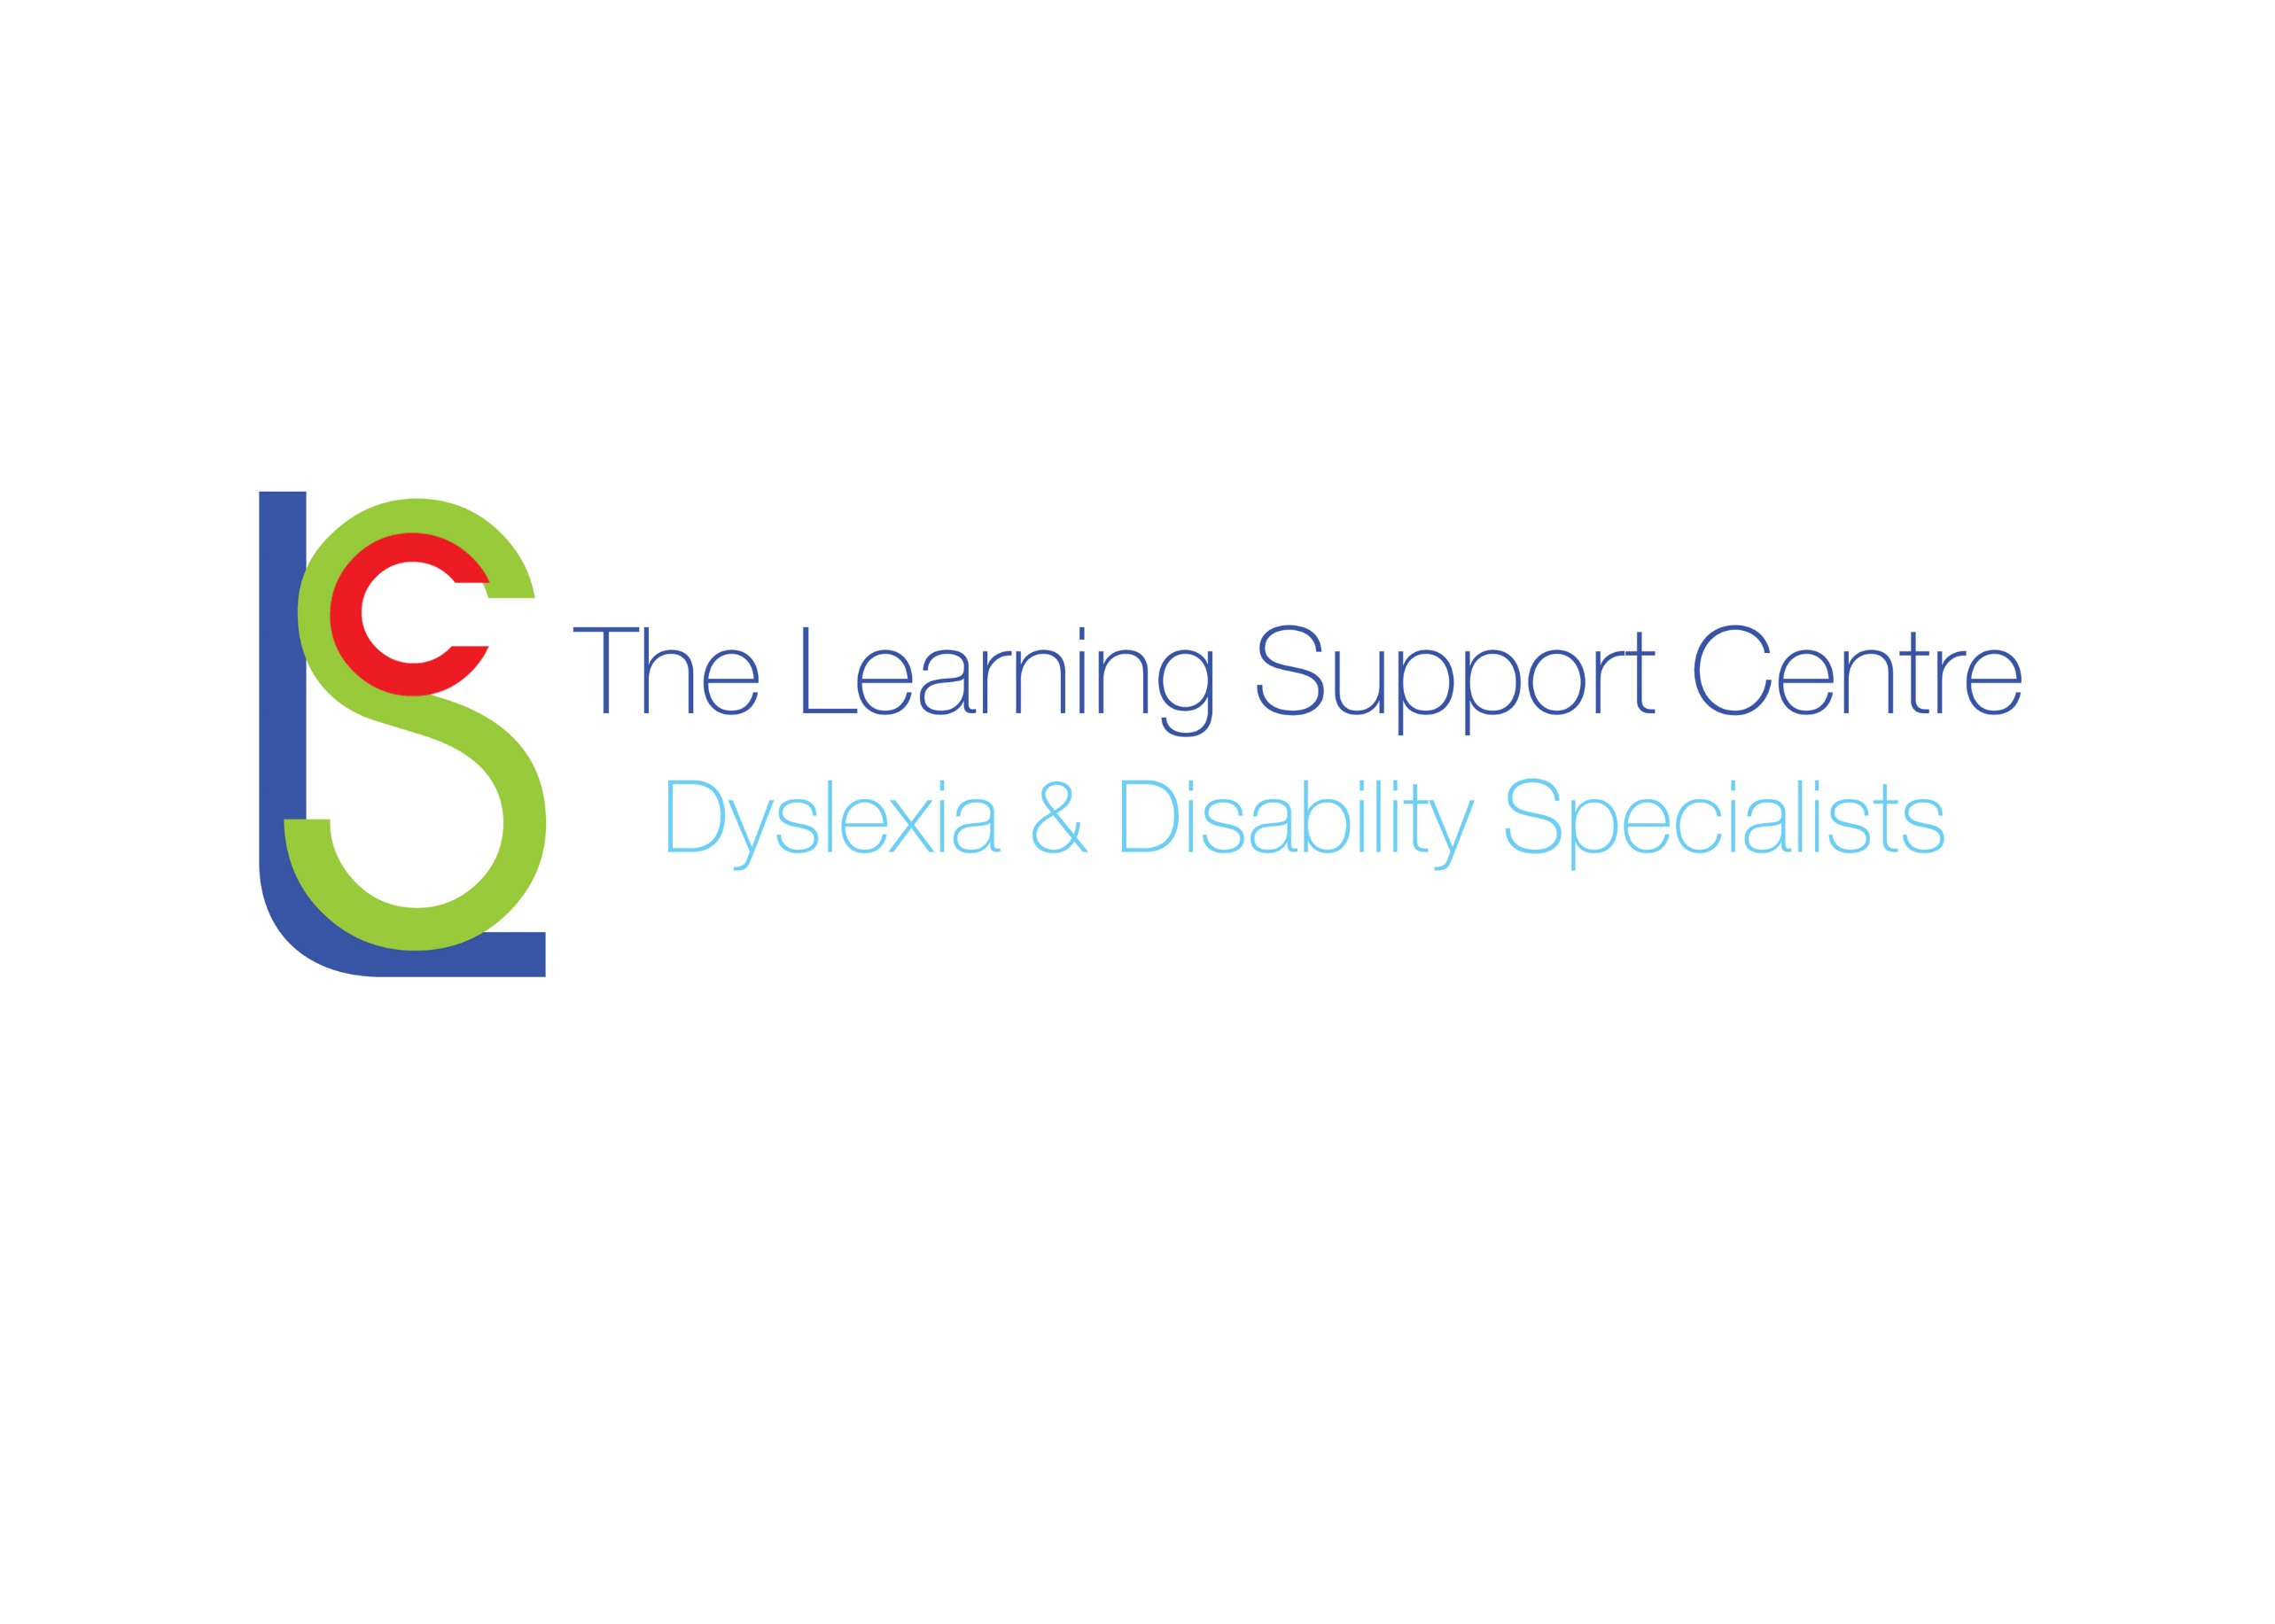 The Learning Support Centre logo